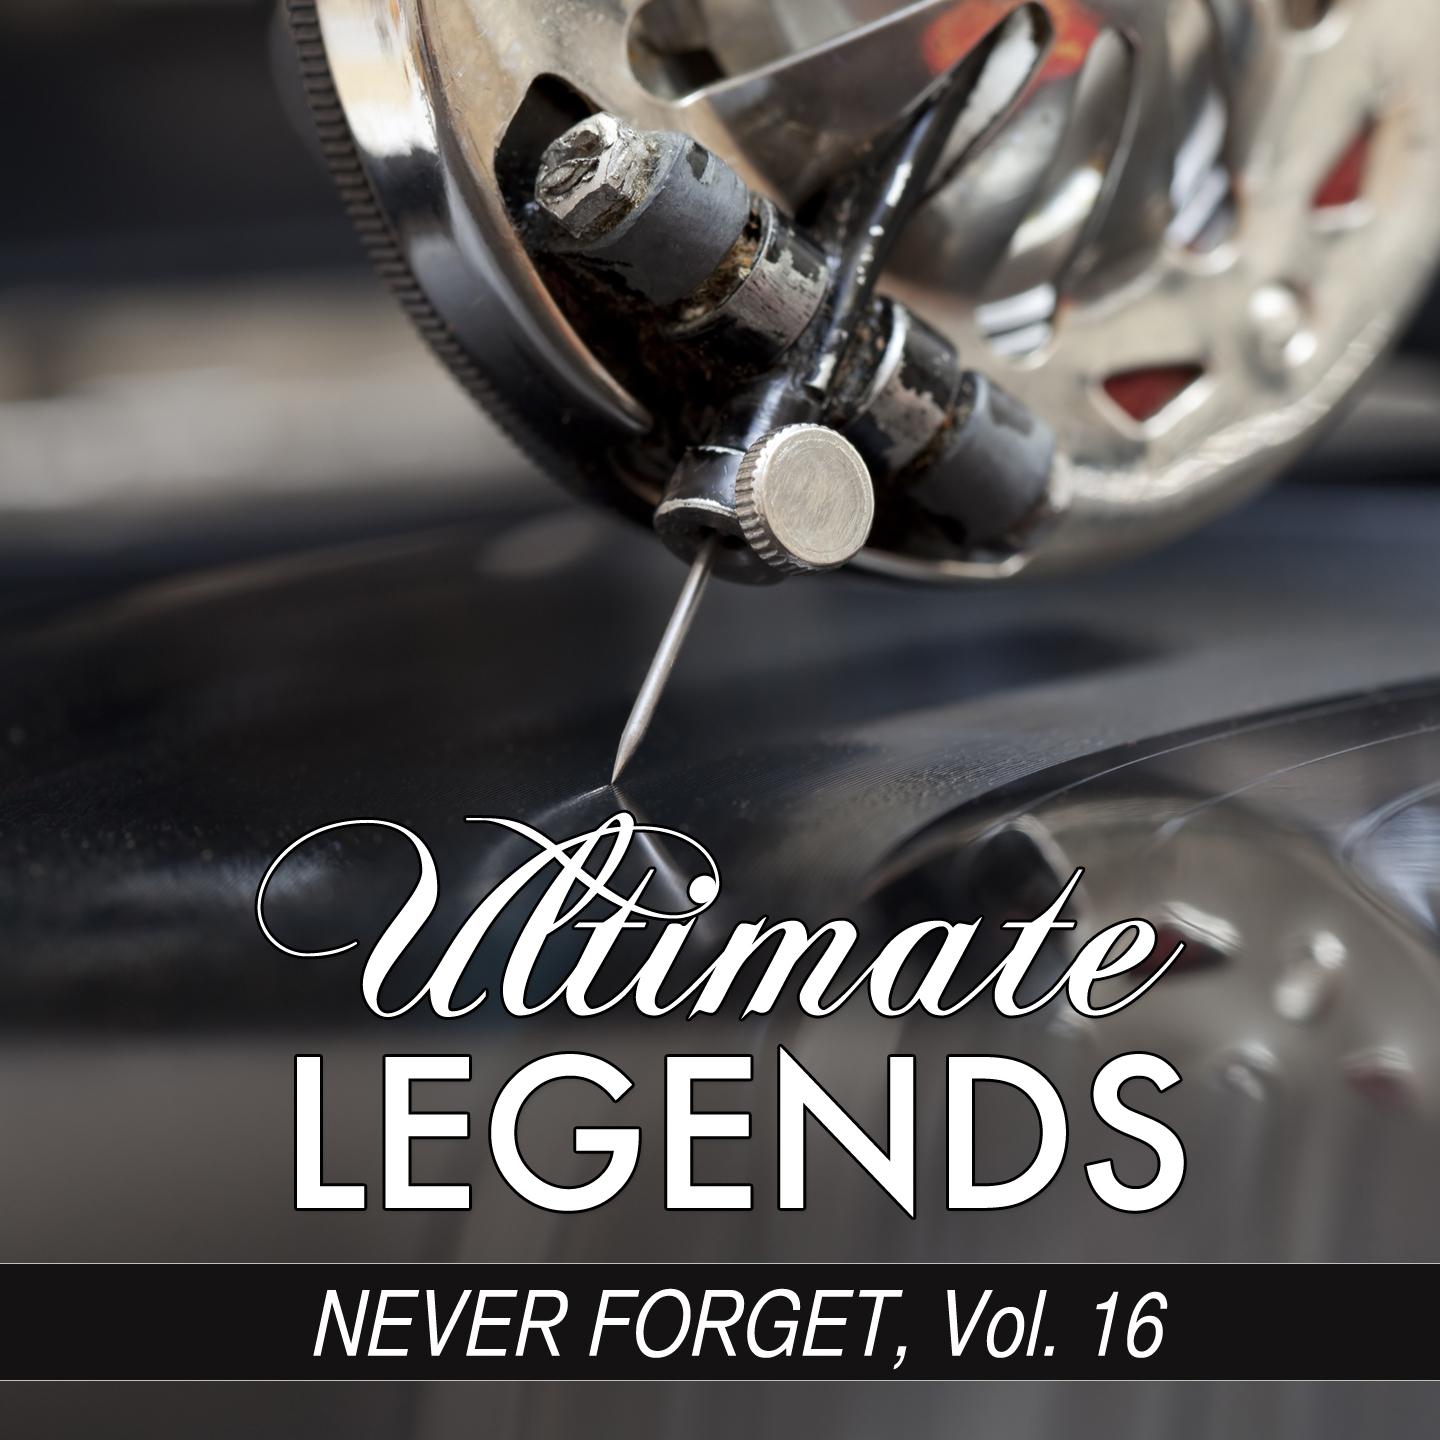 Постер альбома Never Forget, Vol. 16 (Ultimate Legends Presents Never Forget, Vol. 16)